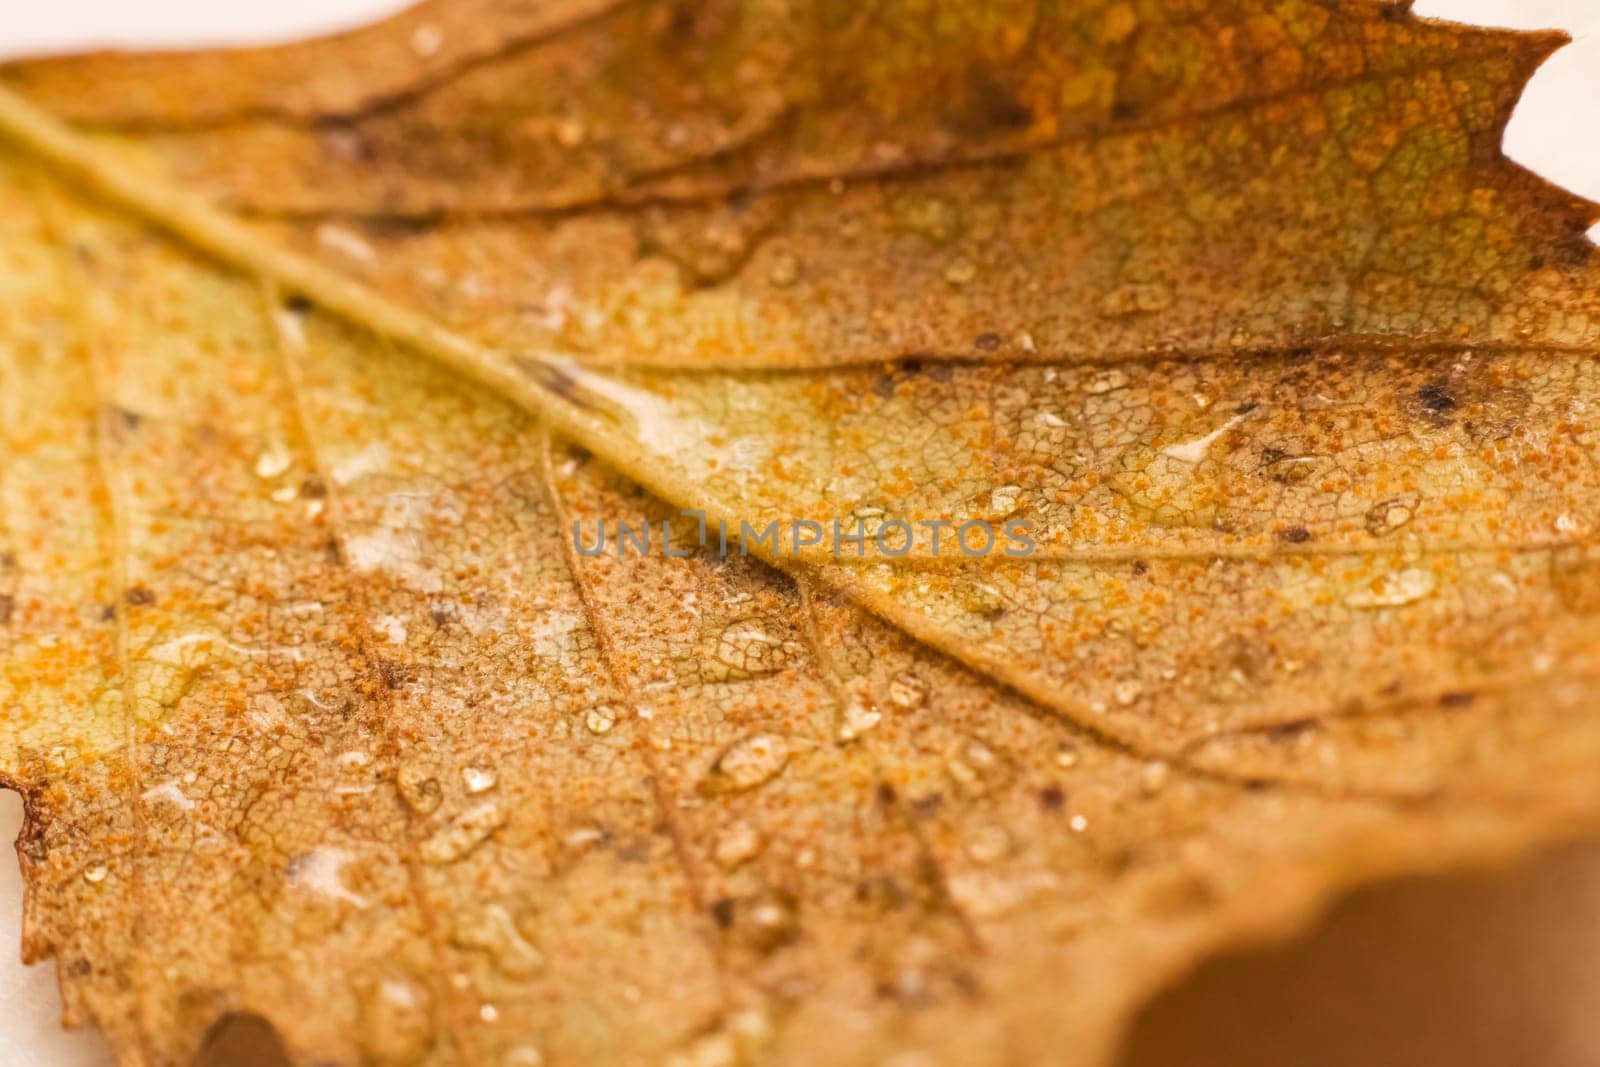 Yellow leaf on tree branches with dew drops by Vera1703